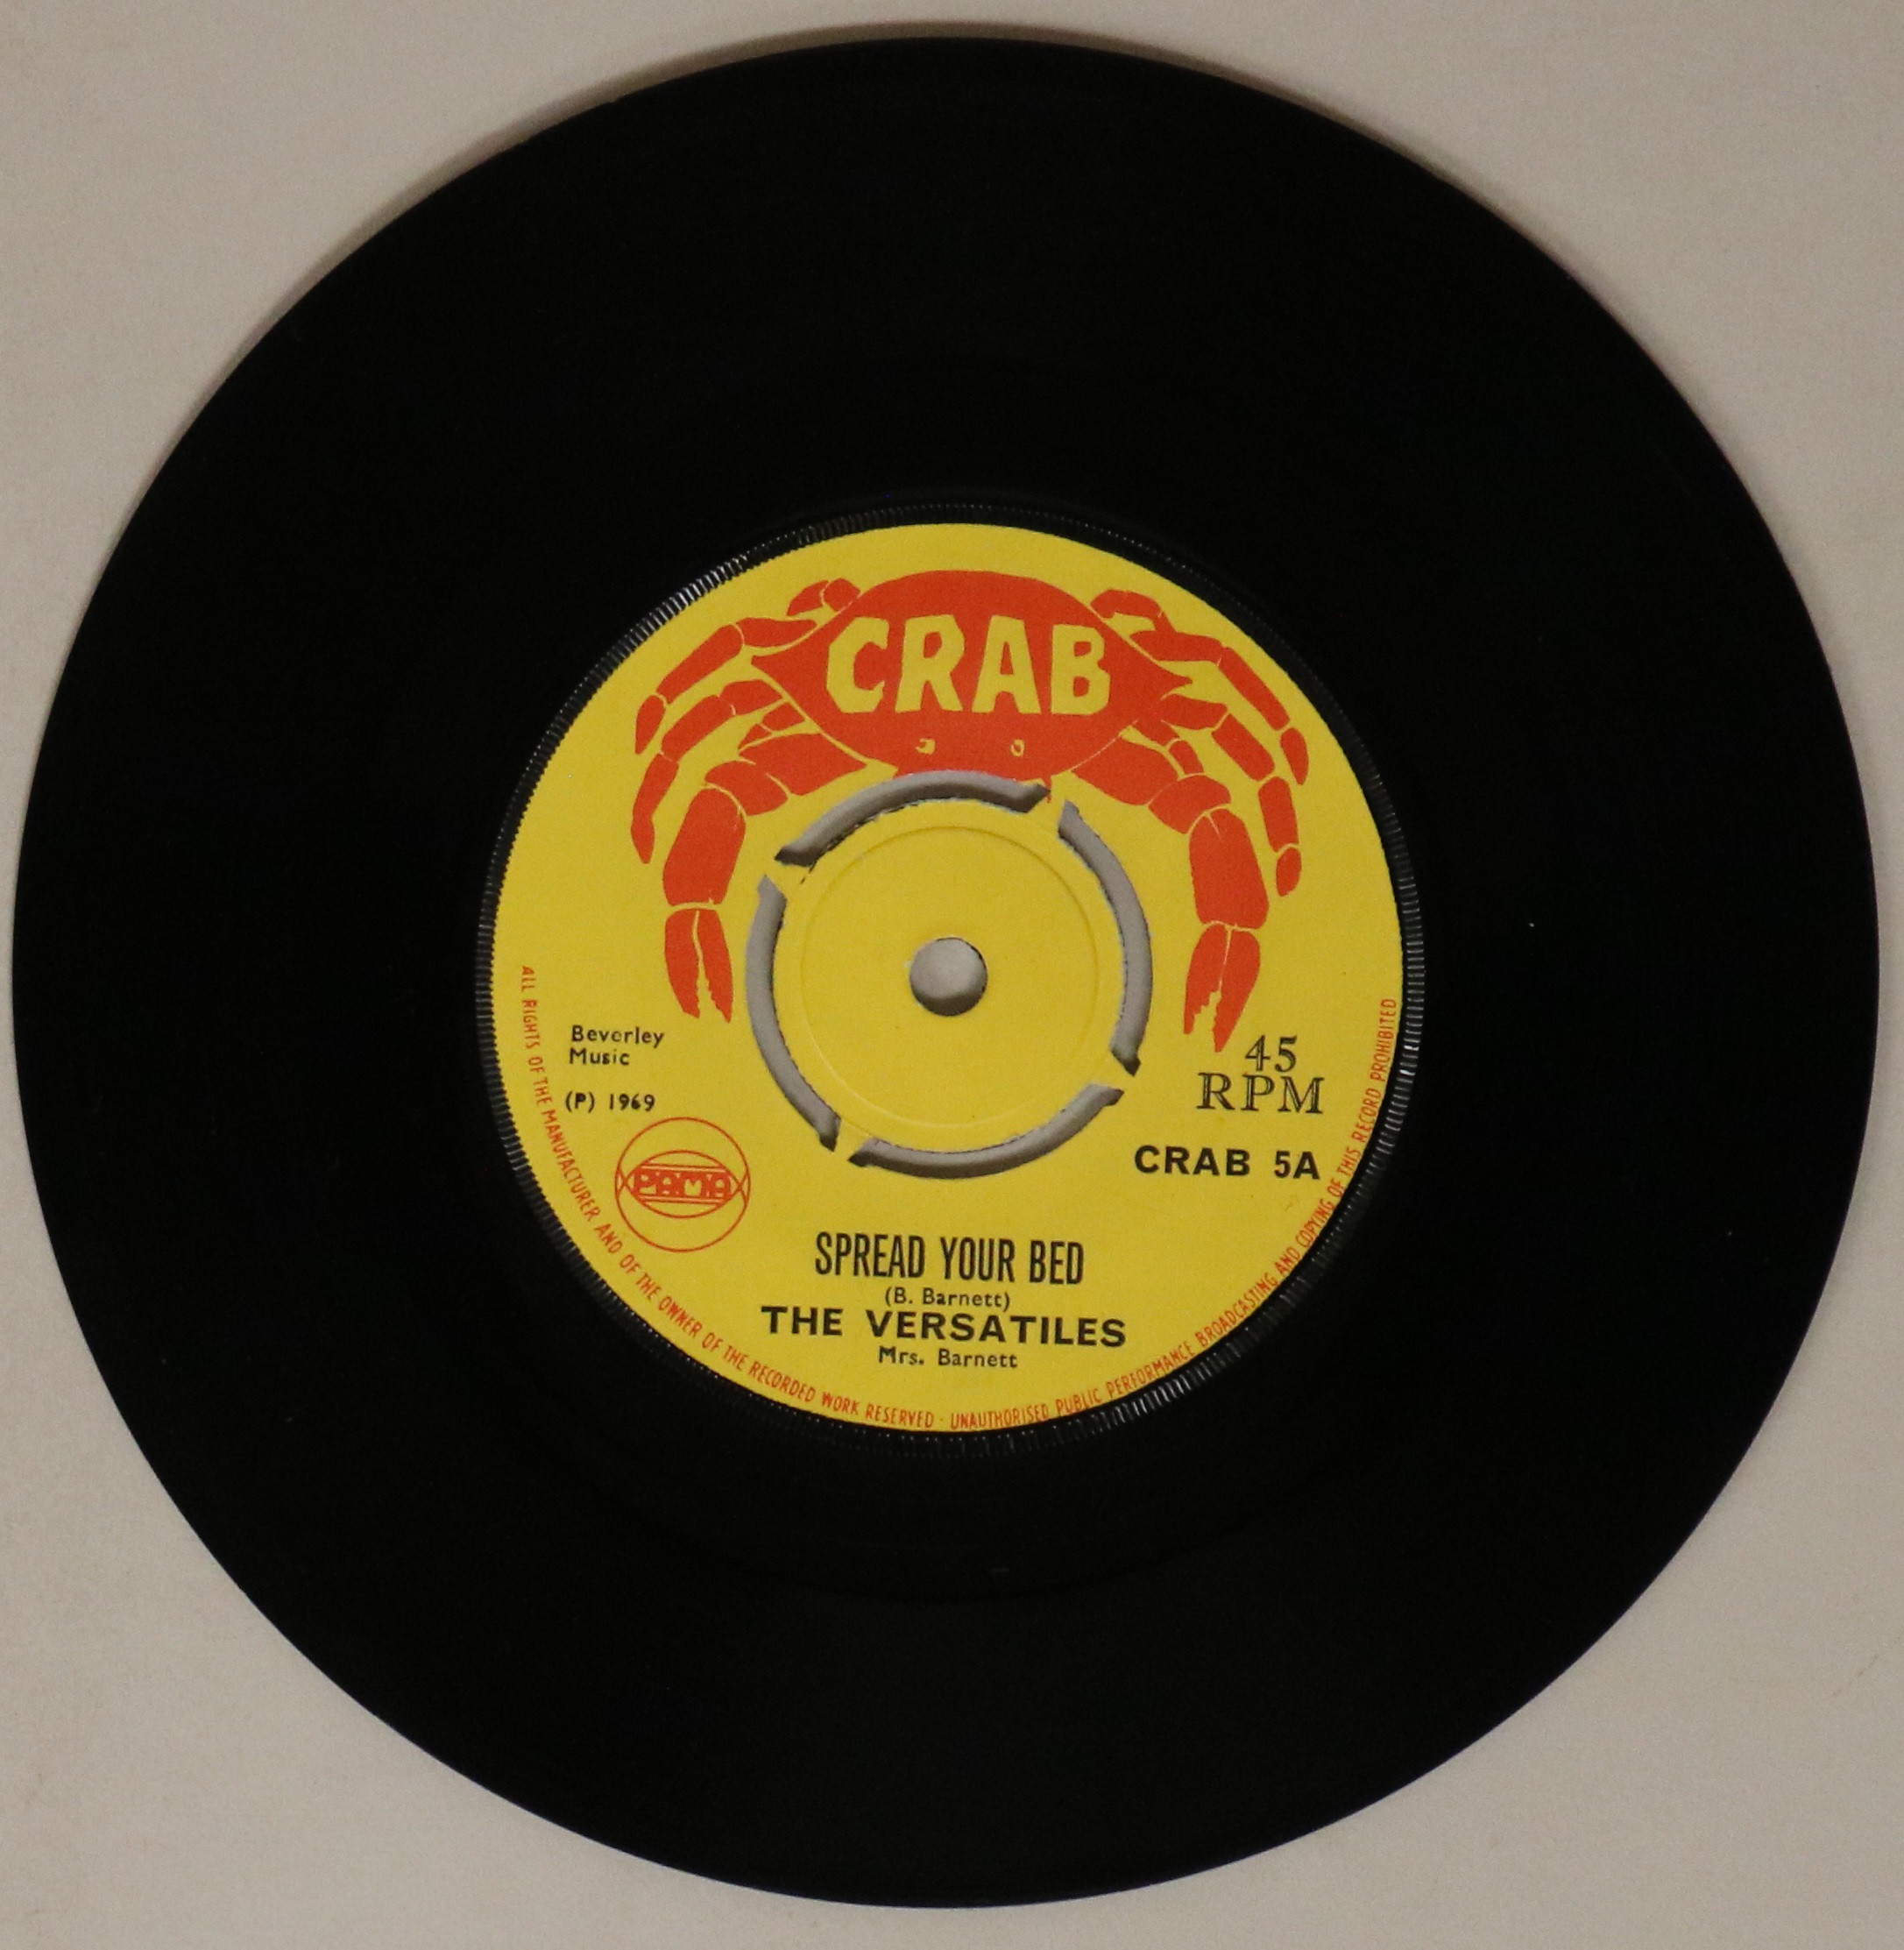 THE VERSATILES - SPREAD YOUR BED C/W WORRIES A YARD 7" (CRAB 5).